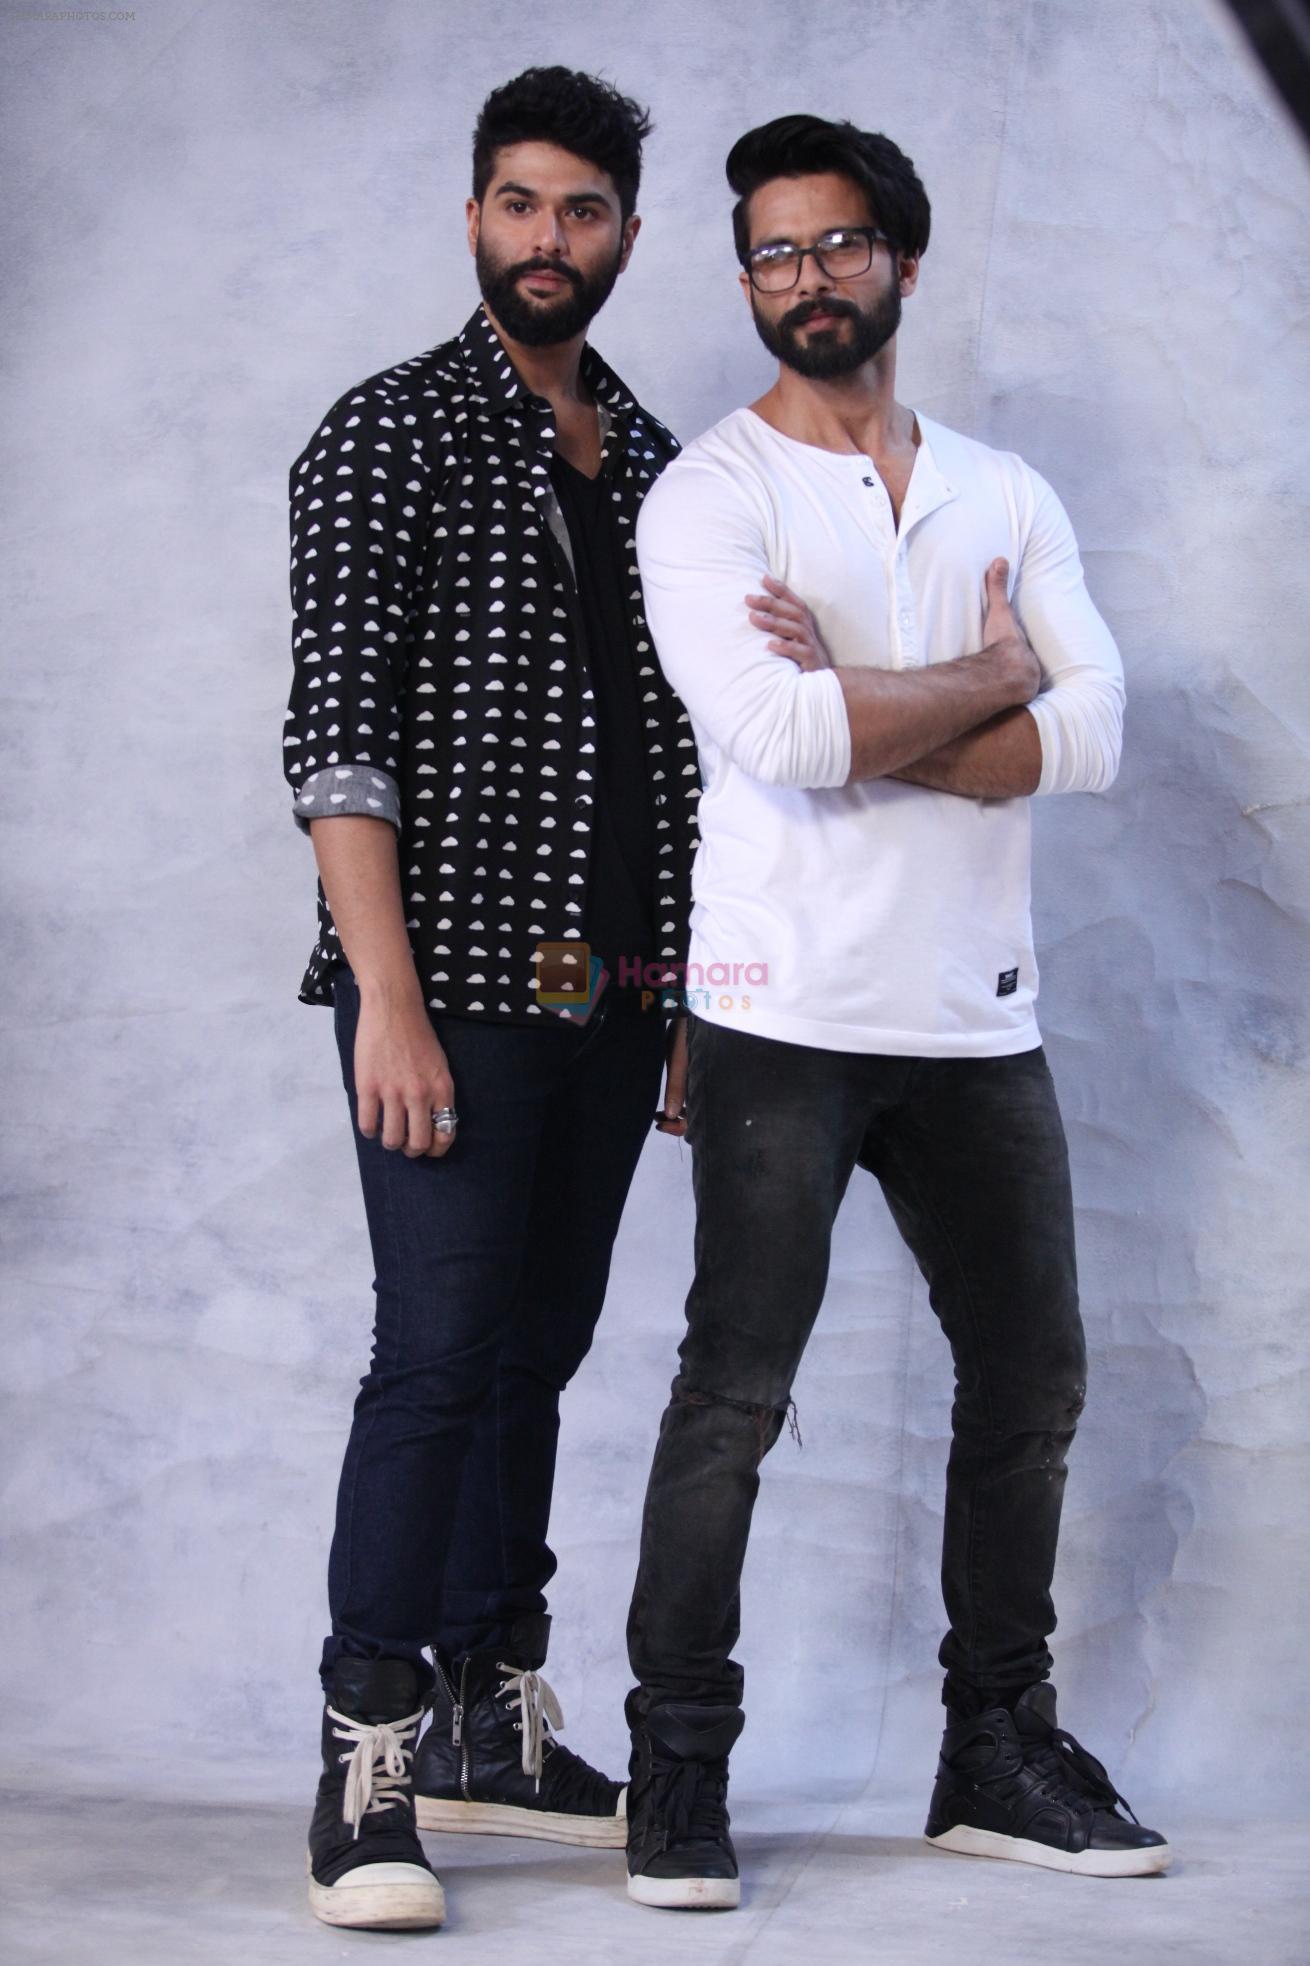 Shahid Kapoor and Kunal Rawal on the episode of COLORS Infinity's Vogue ...